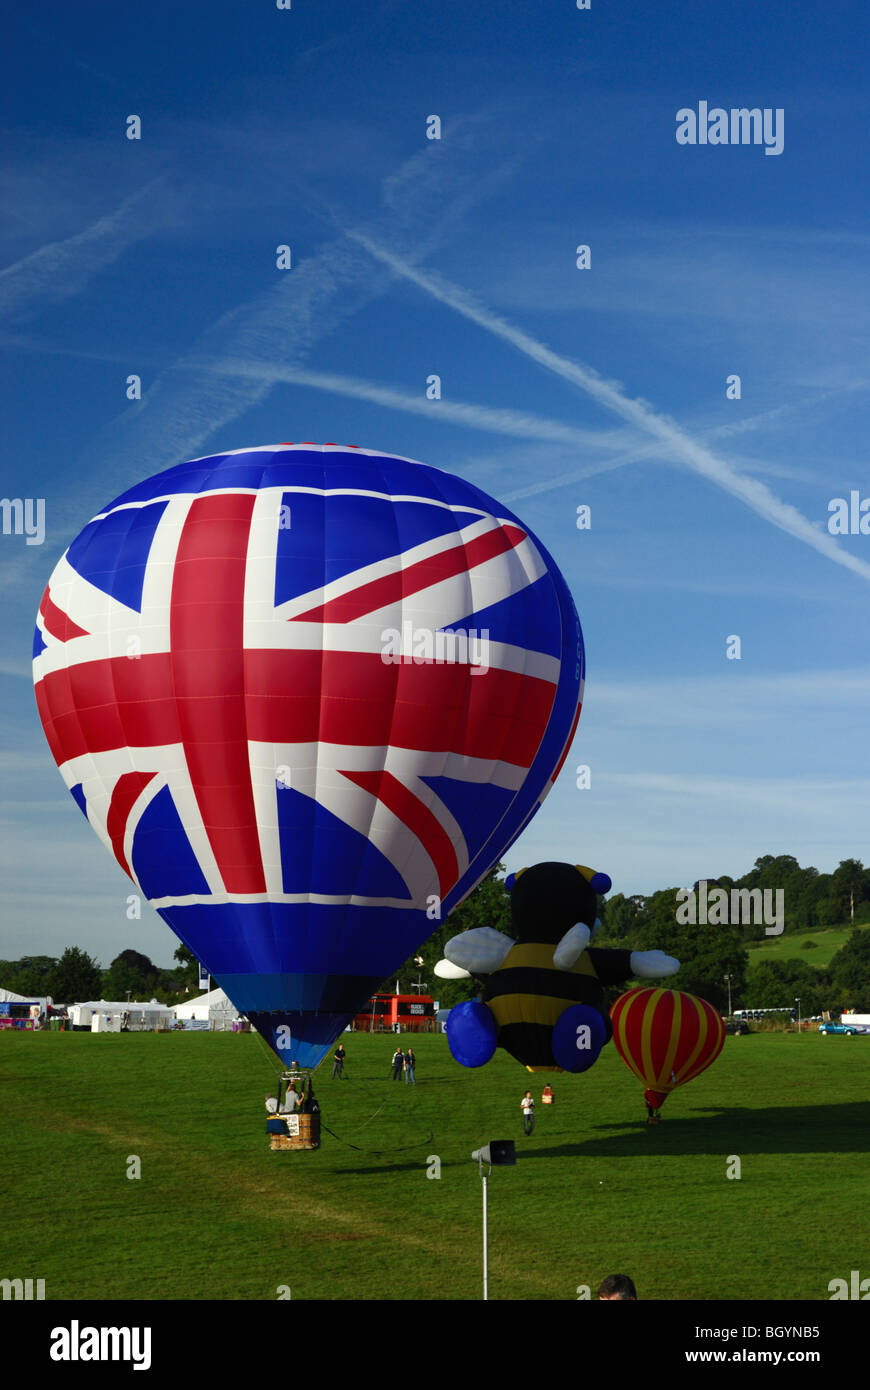 Union Flag and Bumble bee novelty Hot Air Balloons at Bristol International Balloon fiesta on a bright sunny day in 2009 Stock Photo